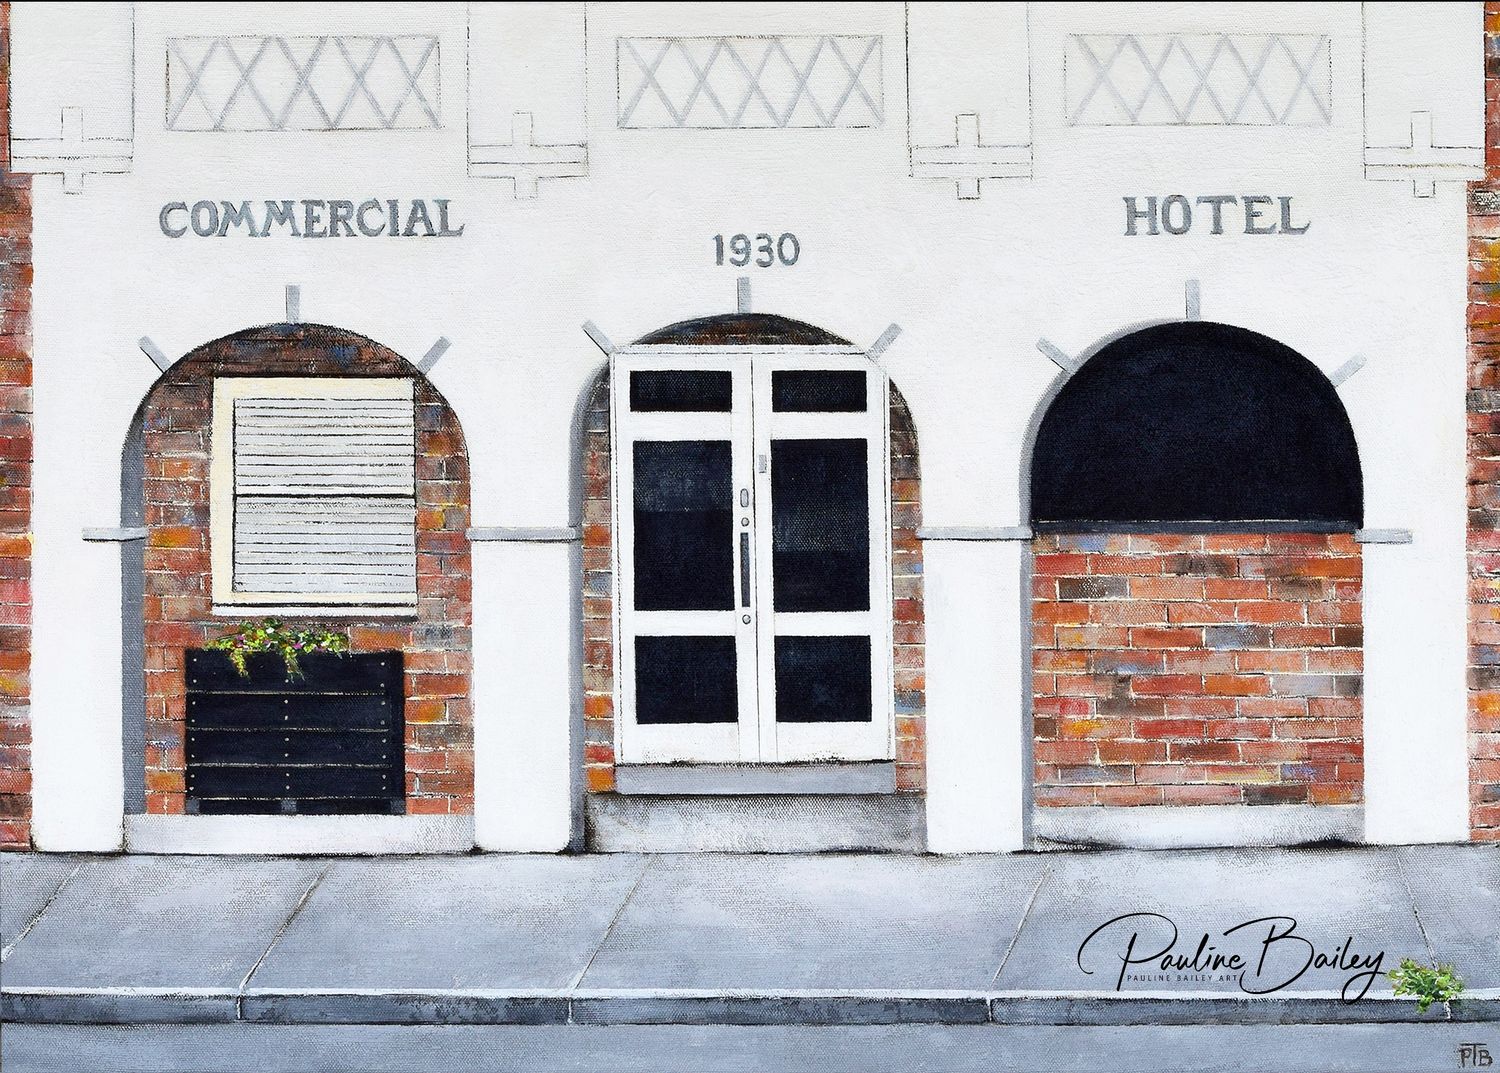 Original painting - Commercial Hotel, Heyfield. *On display at West Gippsland Arts Centre until 2nd June. See item description for pickup/delivery options.